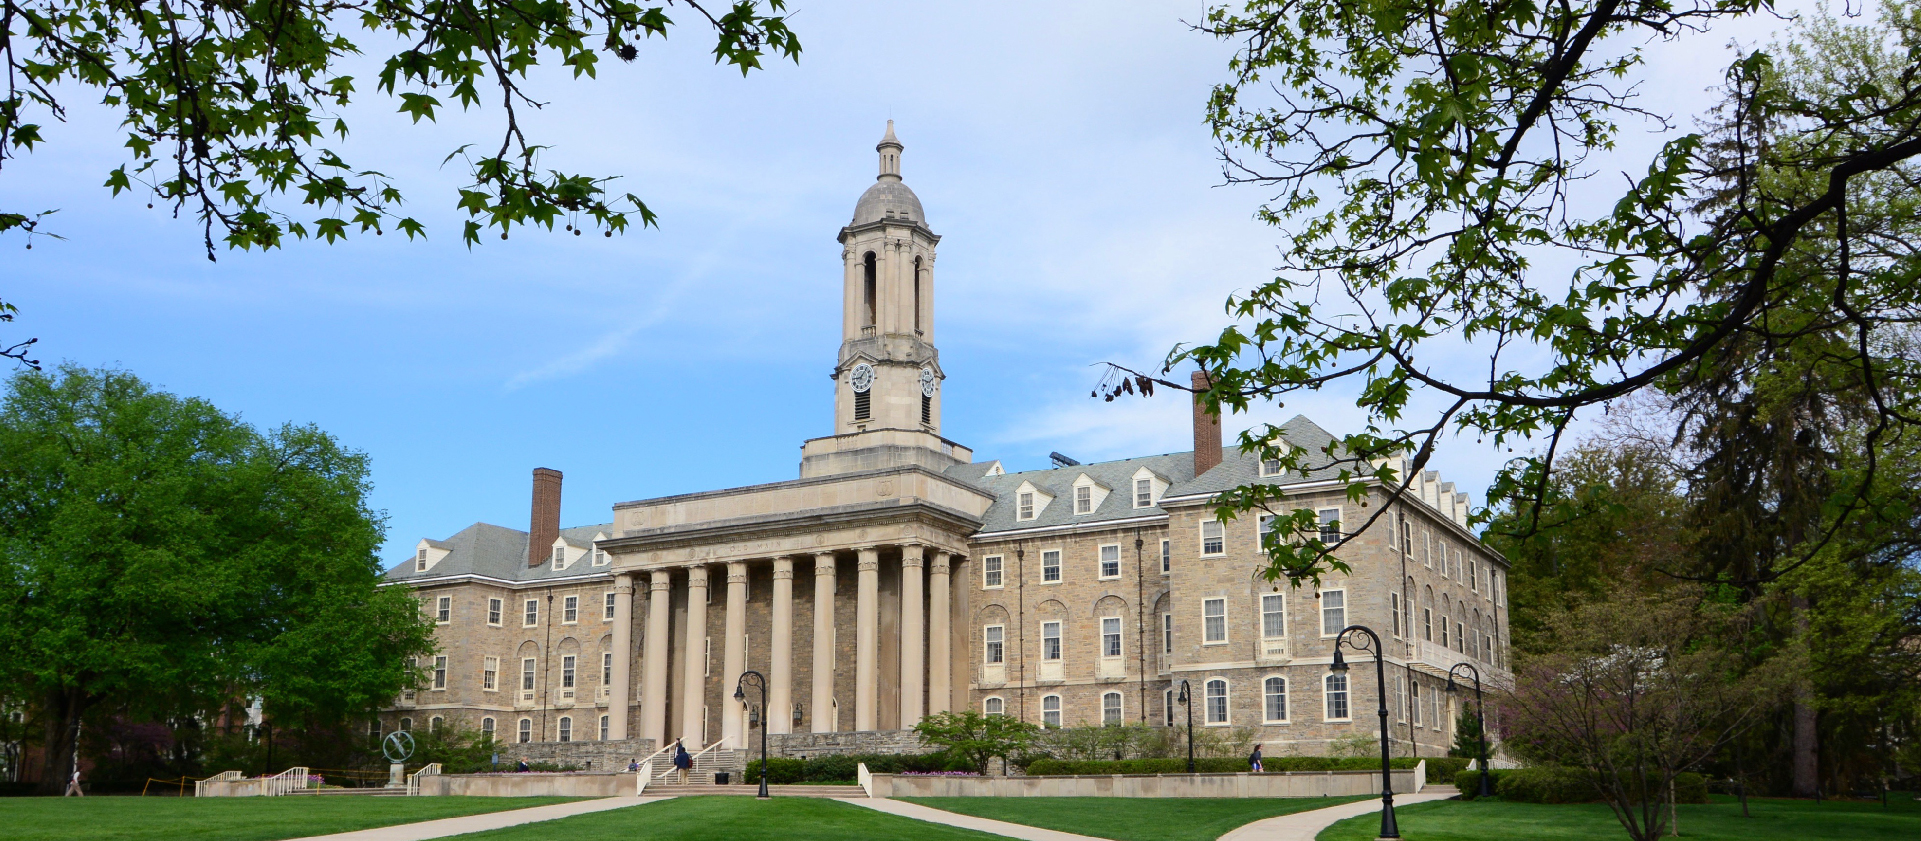 About Us - Penn State World Campus